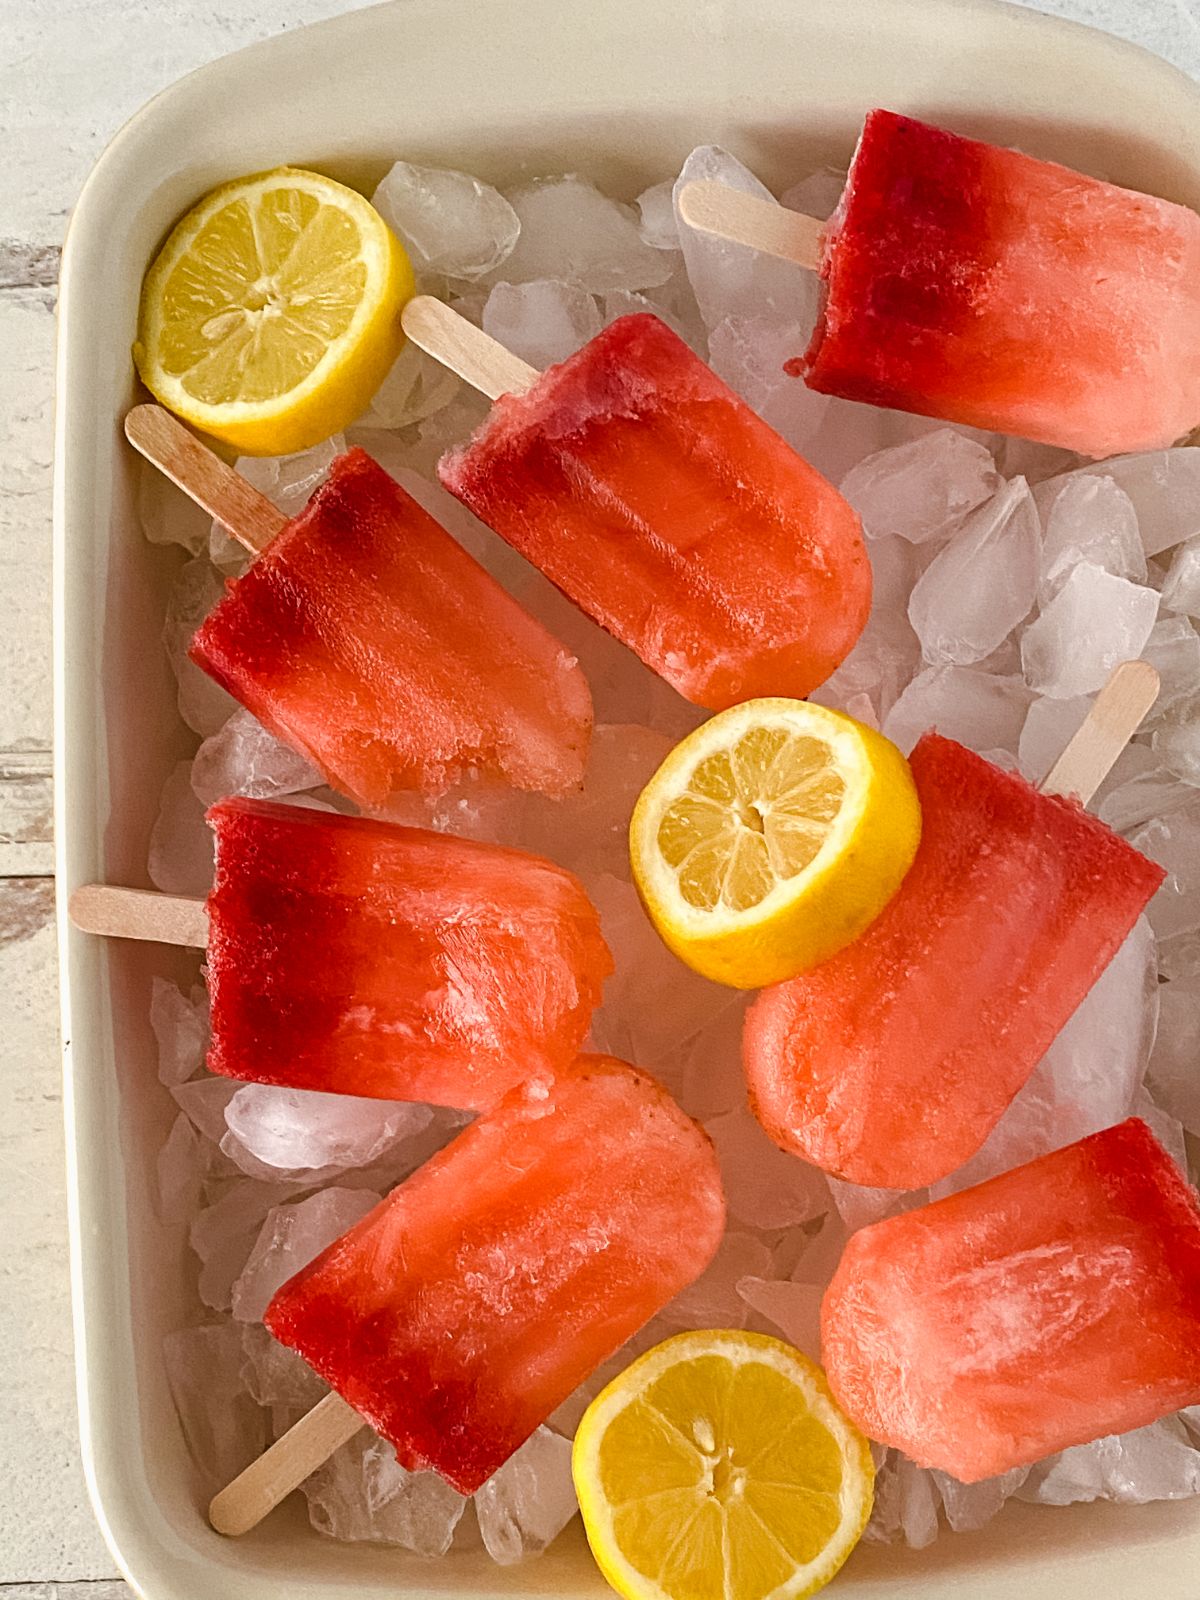 pink ice pops on ice by lemon slices